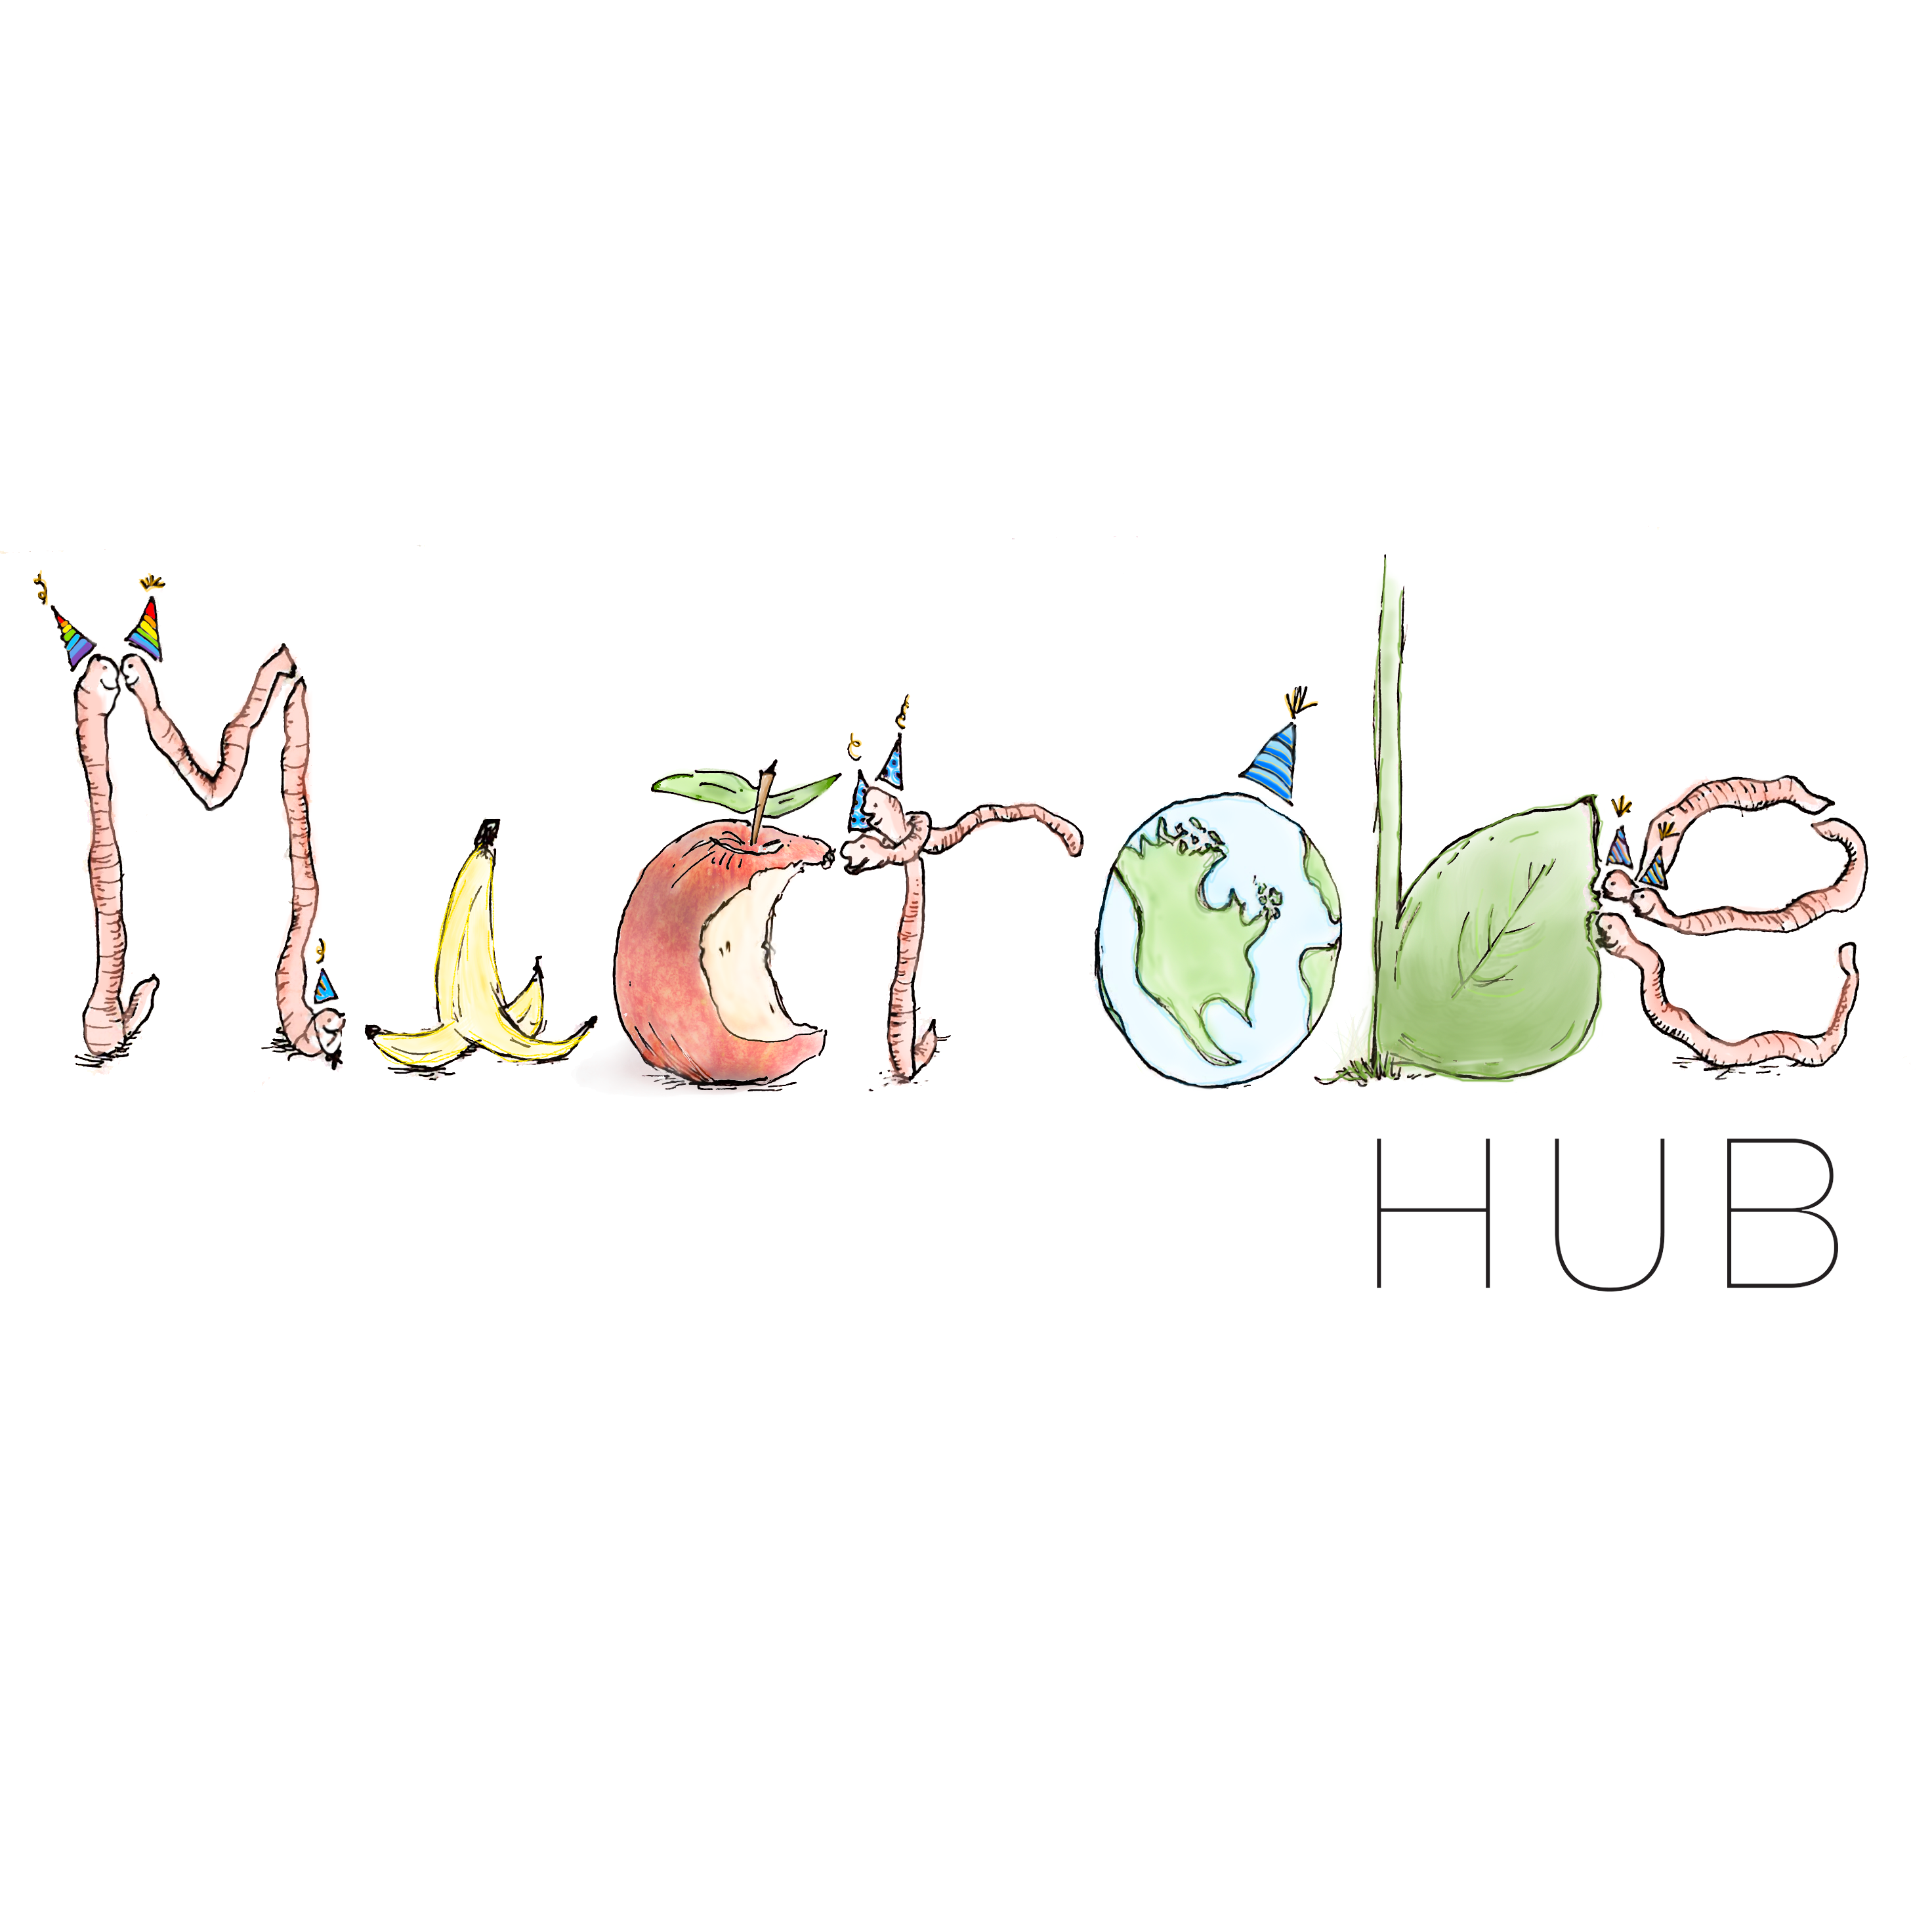 This logo for "Microbe Hub" has the company name in the centre of a white square. Each letter is replaced by an icon that represents sustainability (ex. a compoted fruit, leaf, globe, etc.)